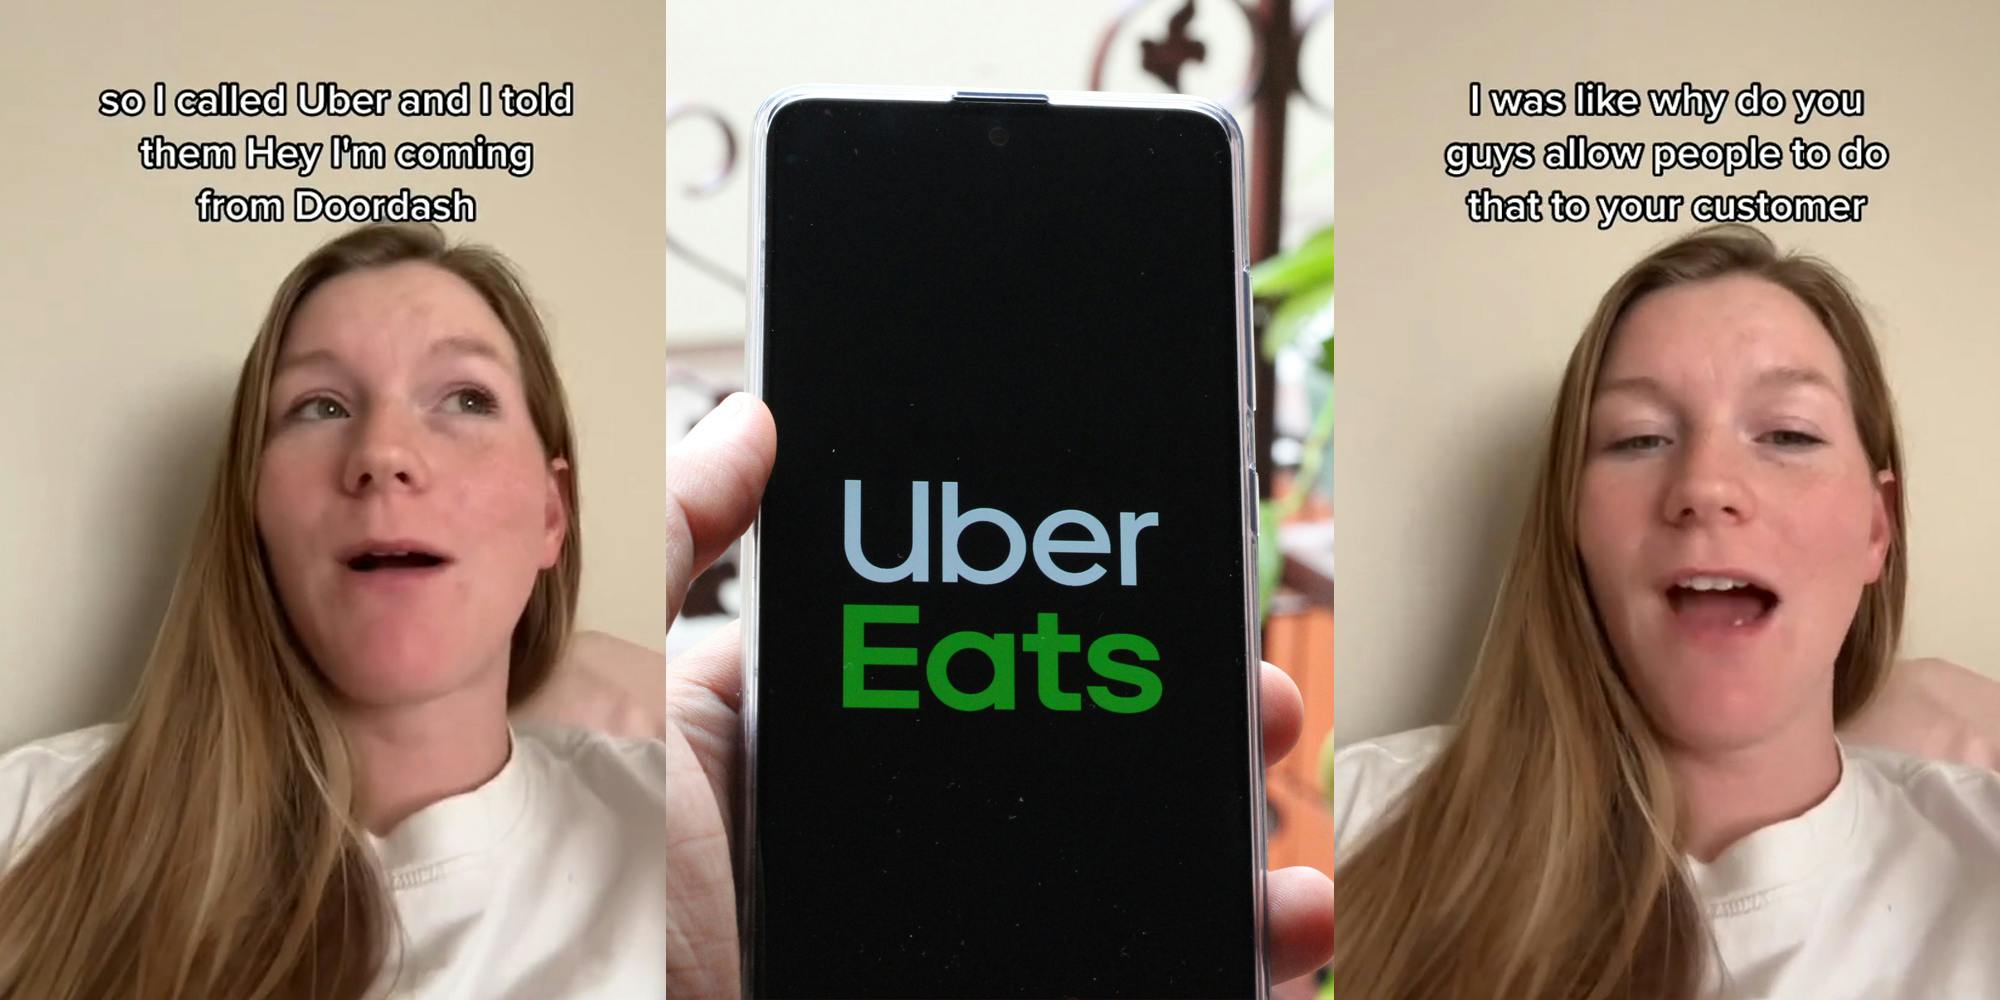 Uber Eats worker speaking in front of tan wall with caption "so I called Uber and I told them hey I'm coming from DoorDash" (l) Uber Eats on phone in hand (c) Uber Eats worker speaking in front of tan wall with caption "I was like why do you guys allow people to do that to your customer" (r)